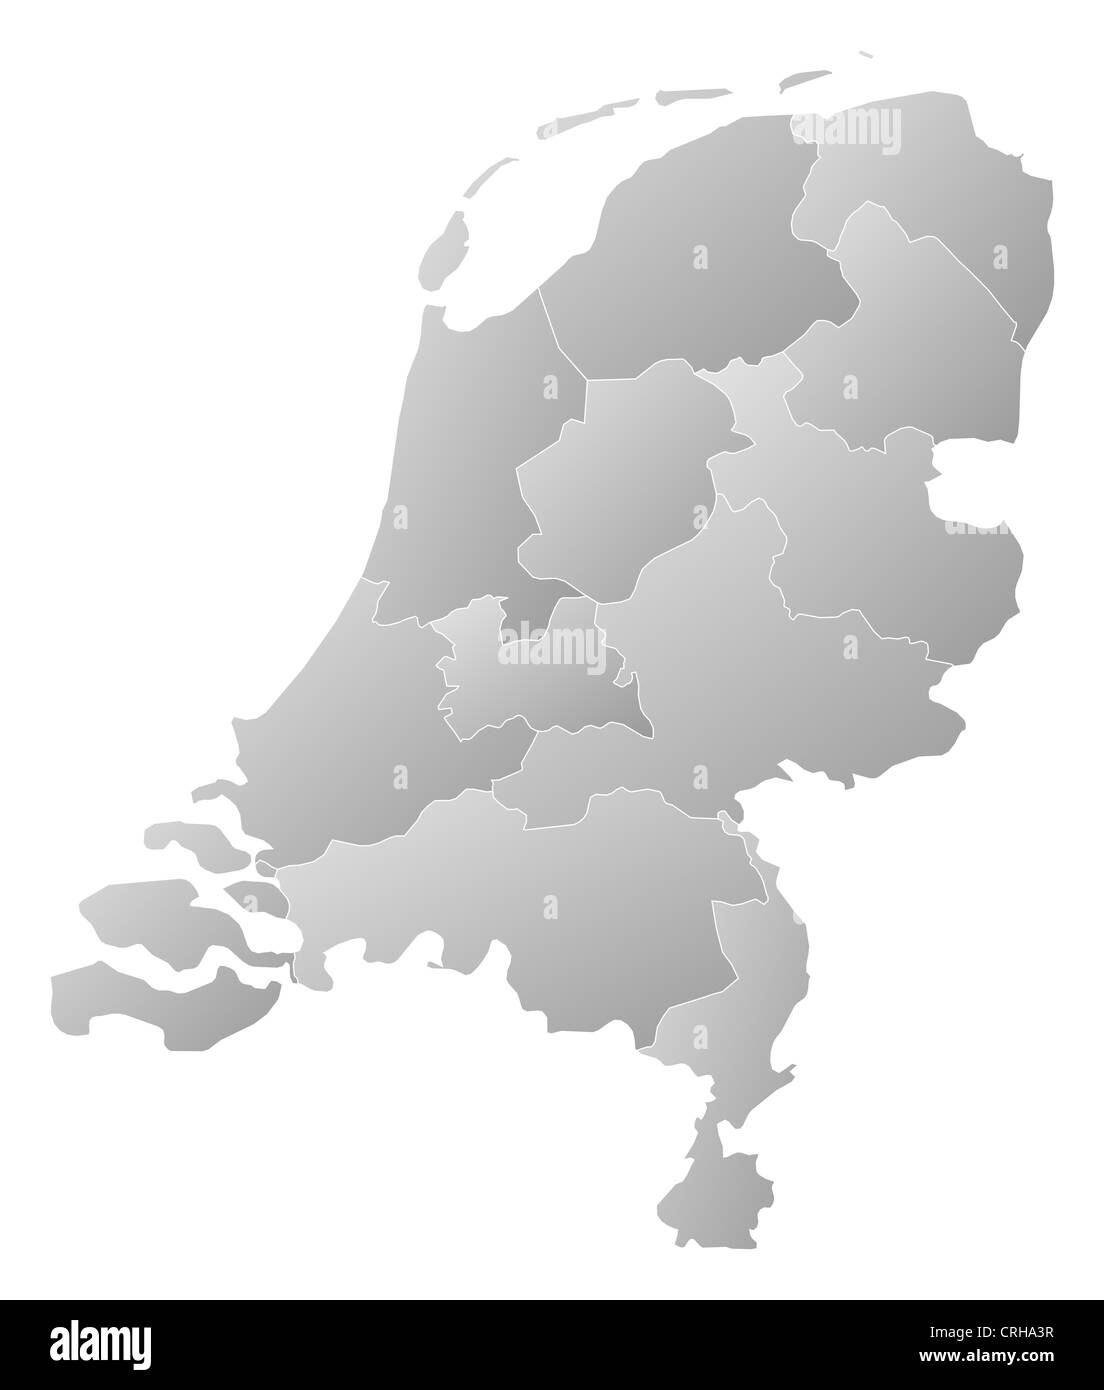 Political map of Netherlands with the several states. Stock Photo